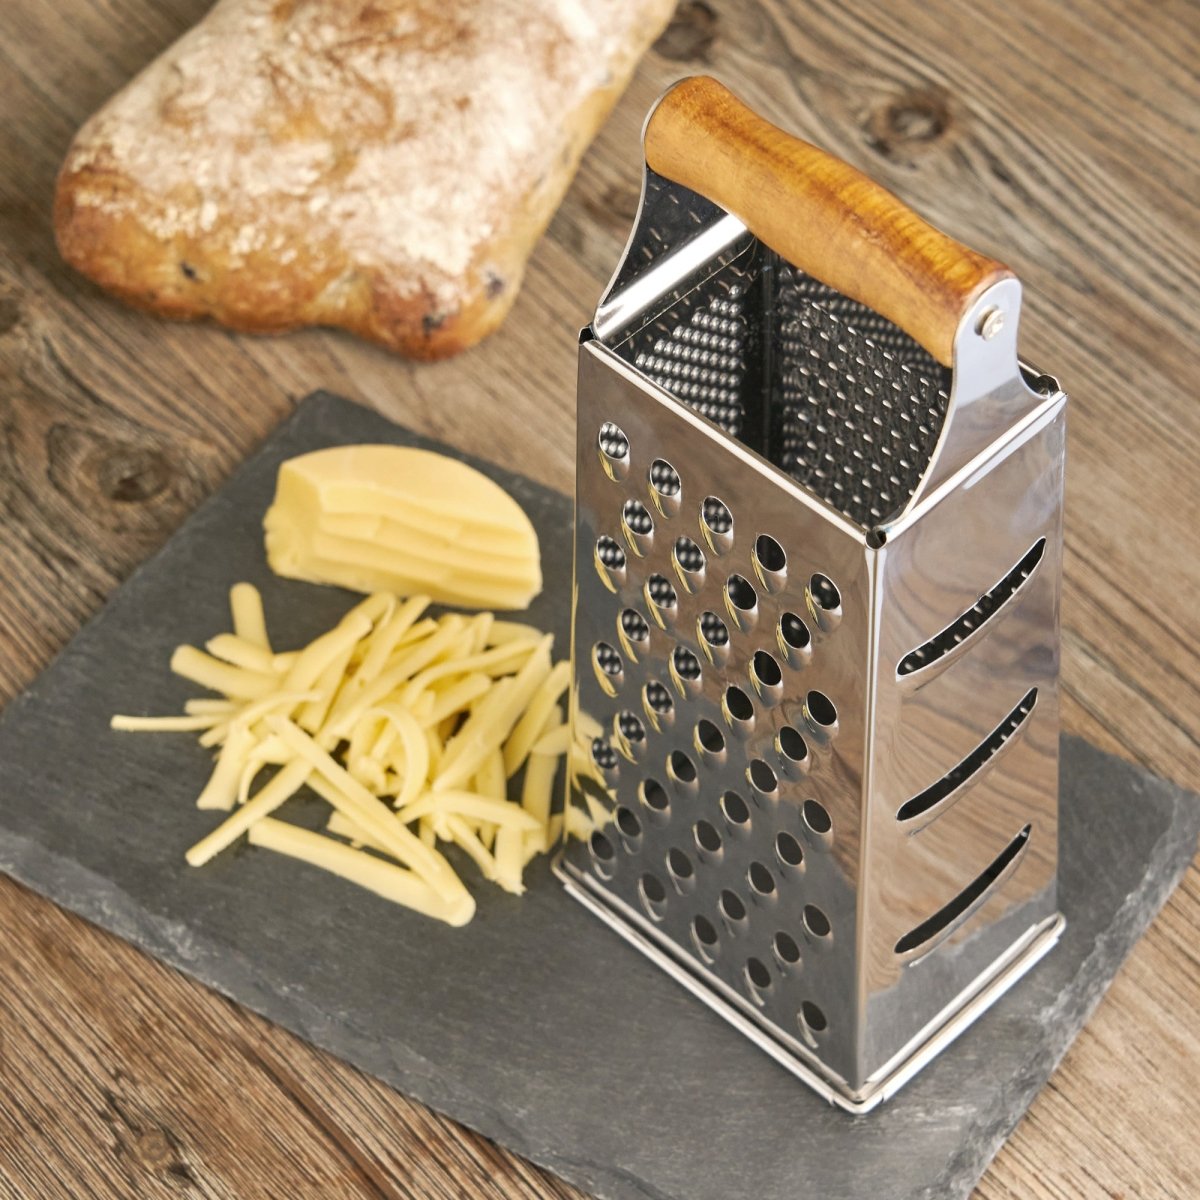 Twine Acacia Wood Handled Cheese Grater